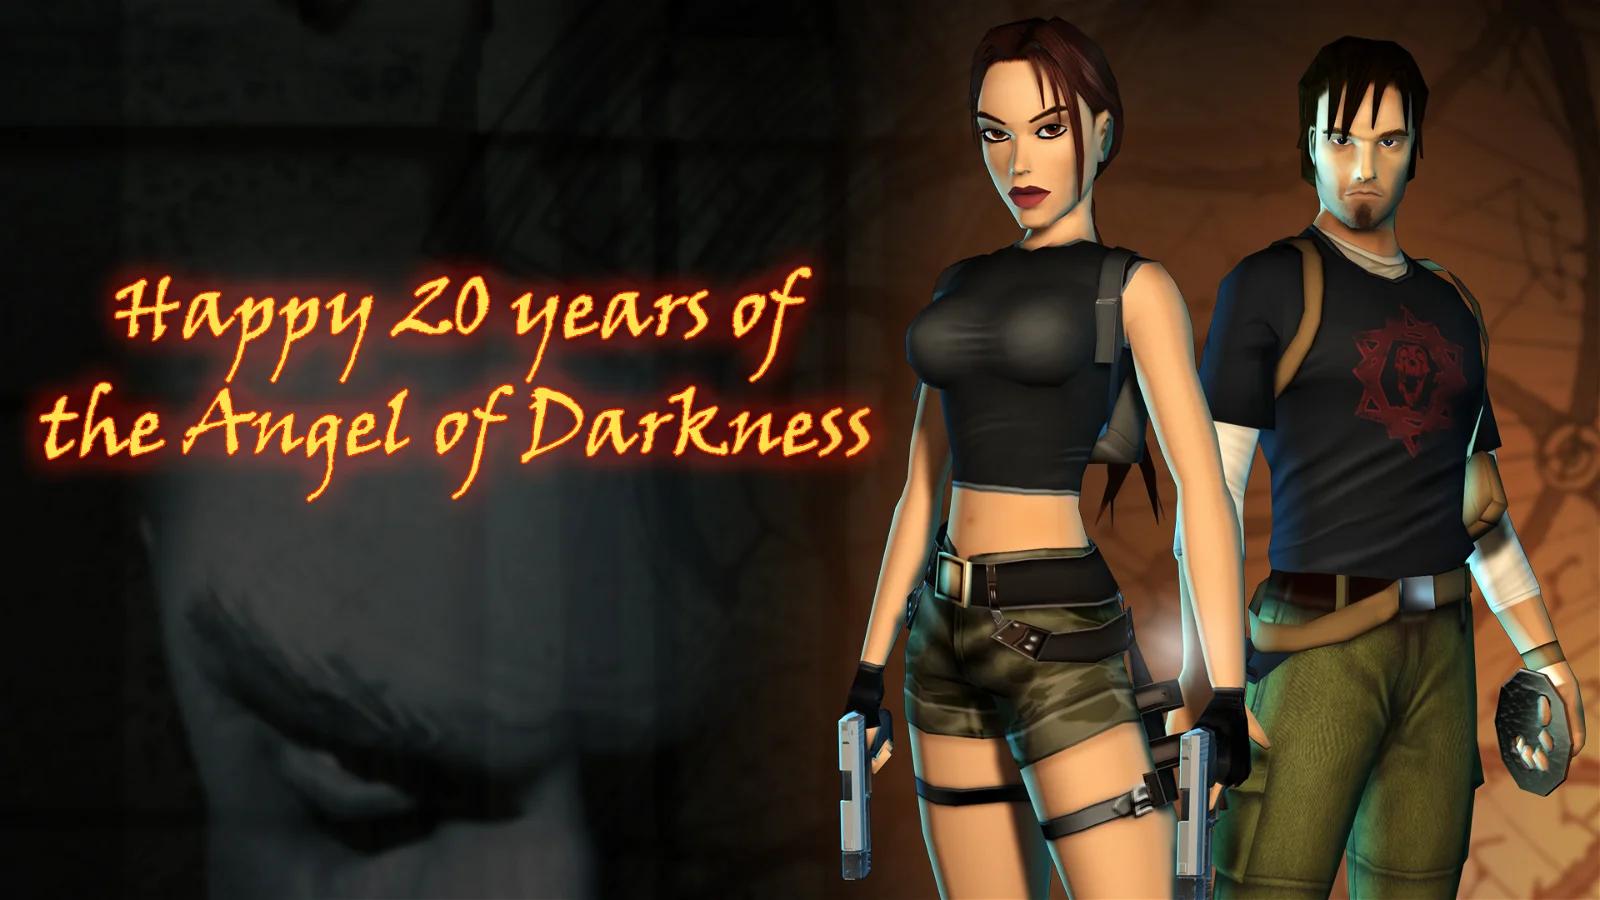 A celebratory image featuring two video game characters from "The Angel of Darkness," with text wishing a happy 20 years to the title.